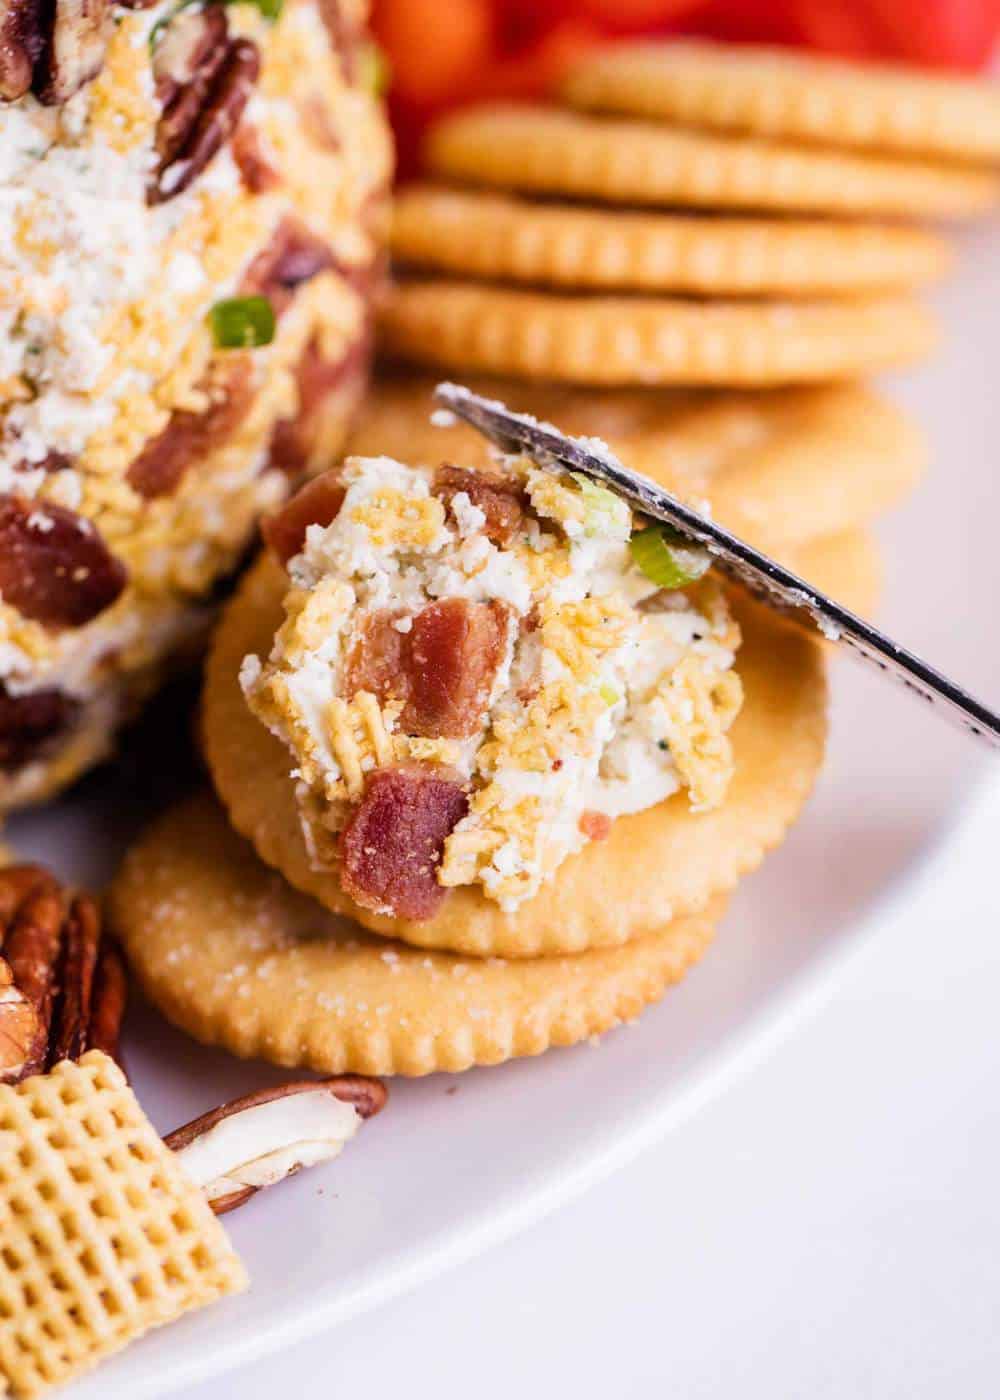 Spreading bacon cheese ball on top of a cracker with a knife.